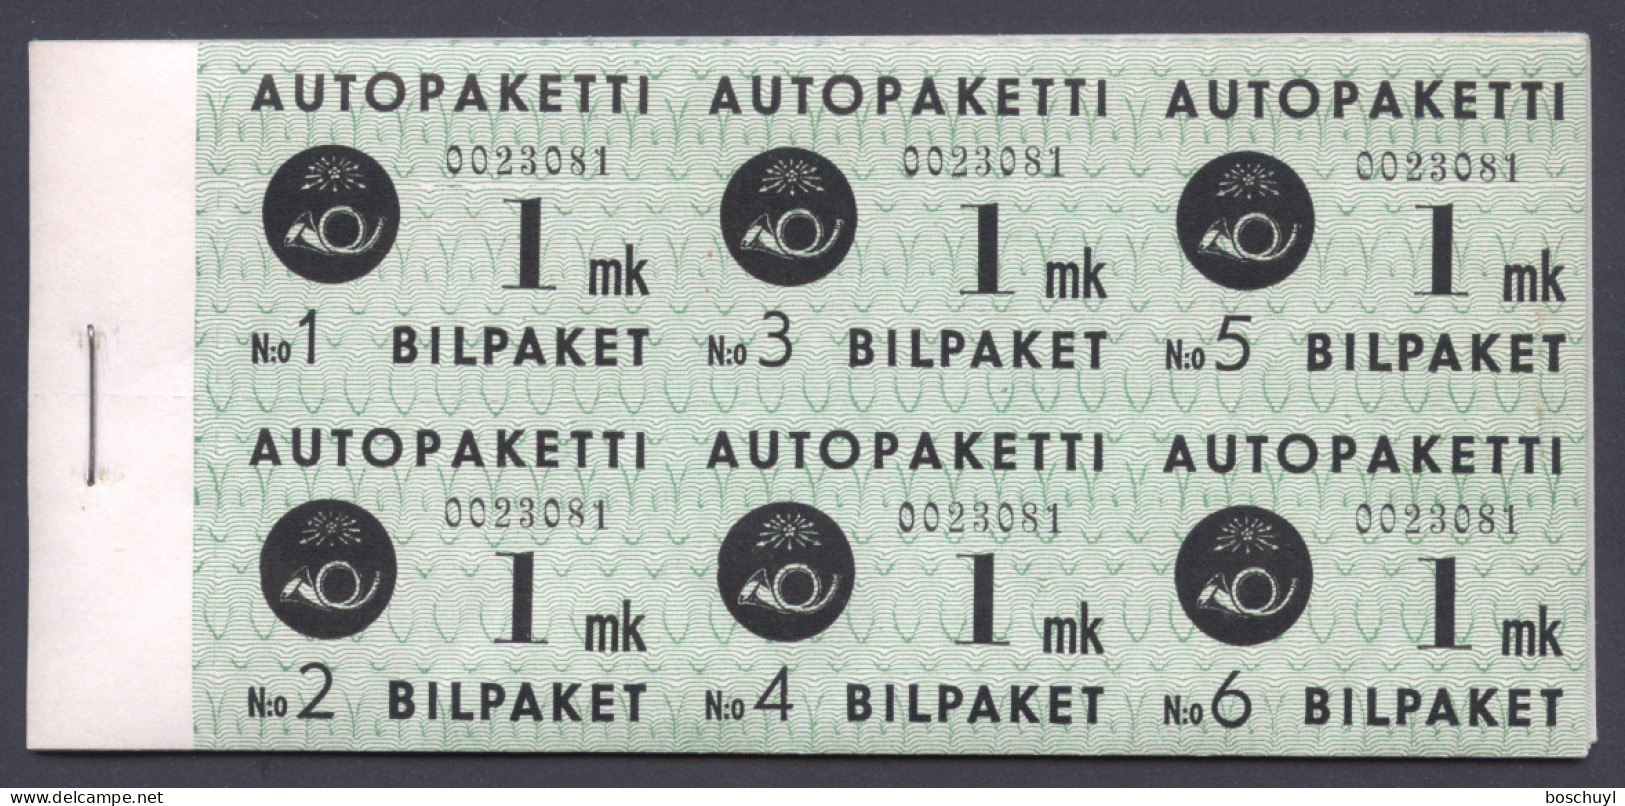 Finland, 1949, Autopaketti, Postcar Stamps, Booklet With 10 Panes Of 6 Stamps, MNH, Michel 1 - Envios Por Bus